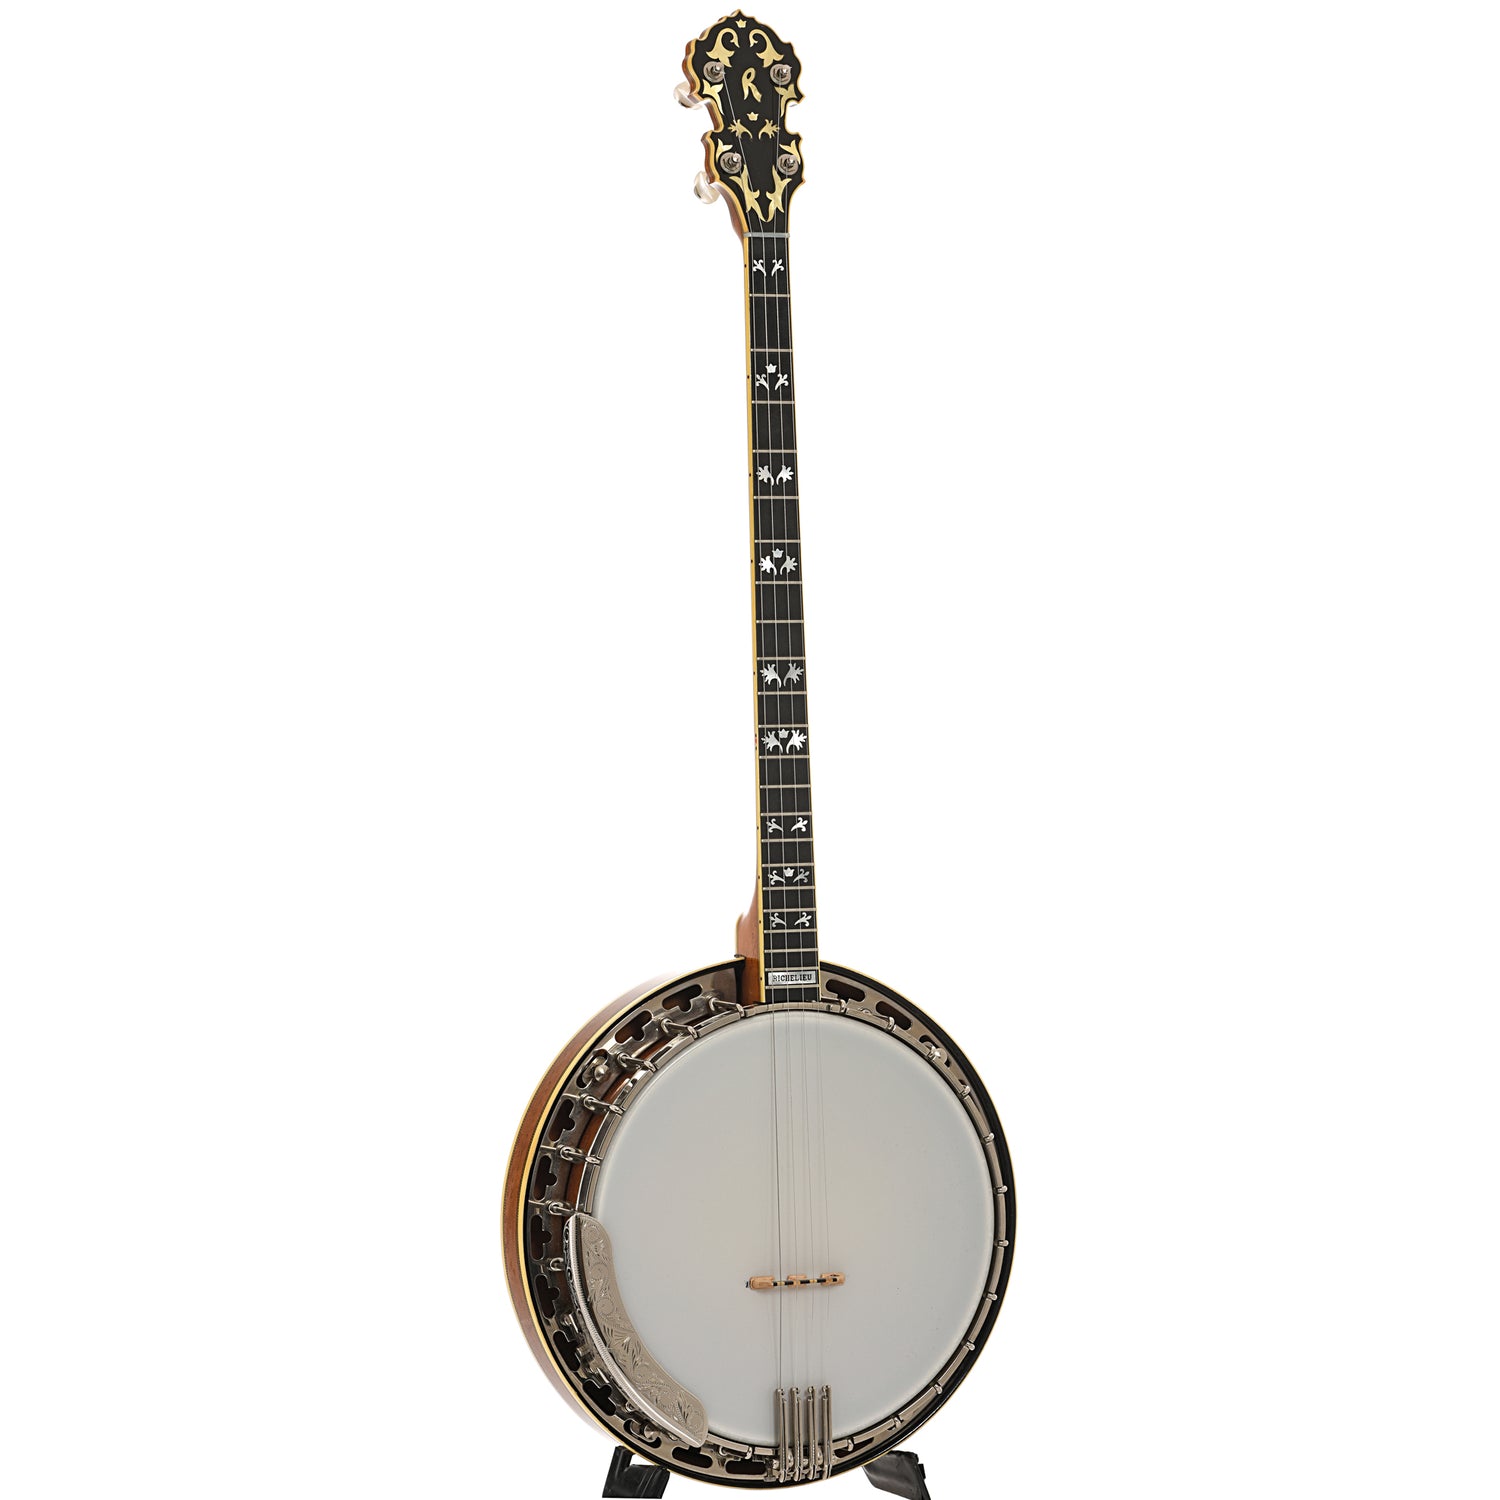 Full front and side of Richelieu 4102 Golden Eagle Plectrum Banjo